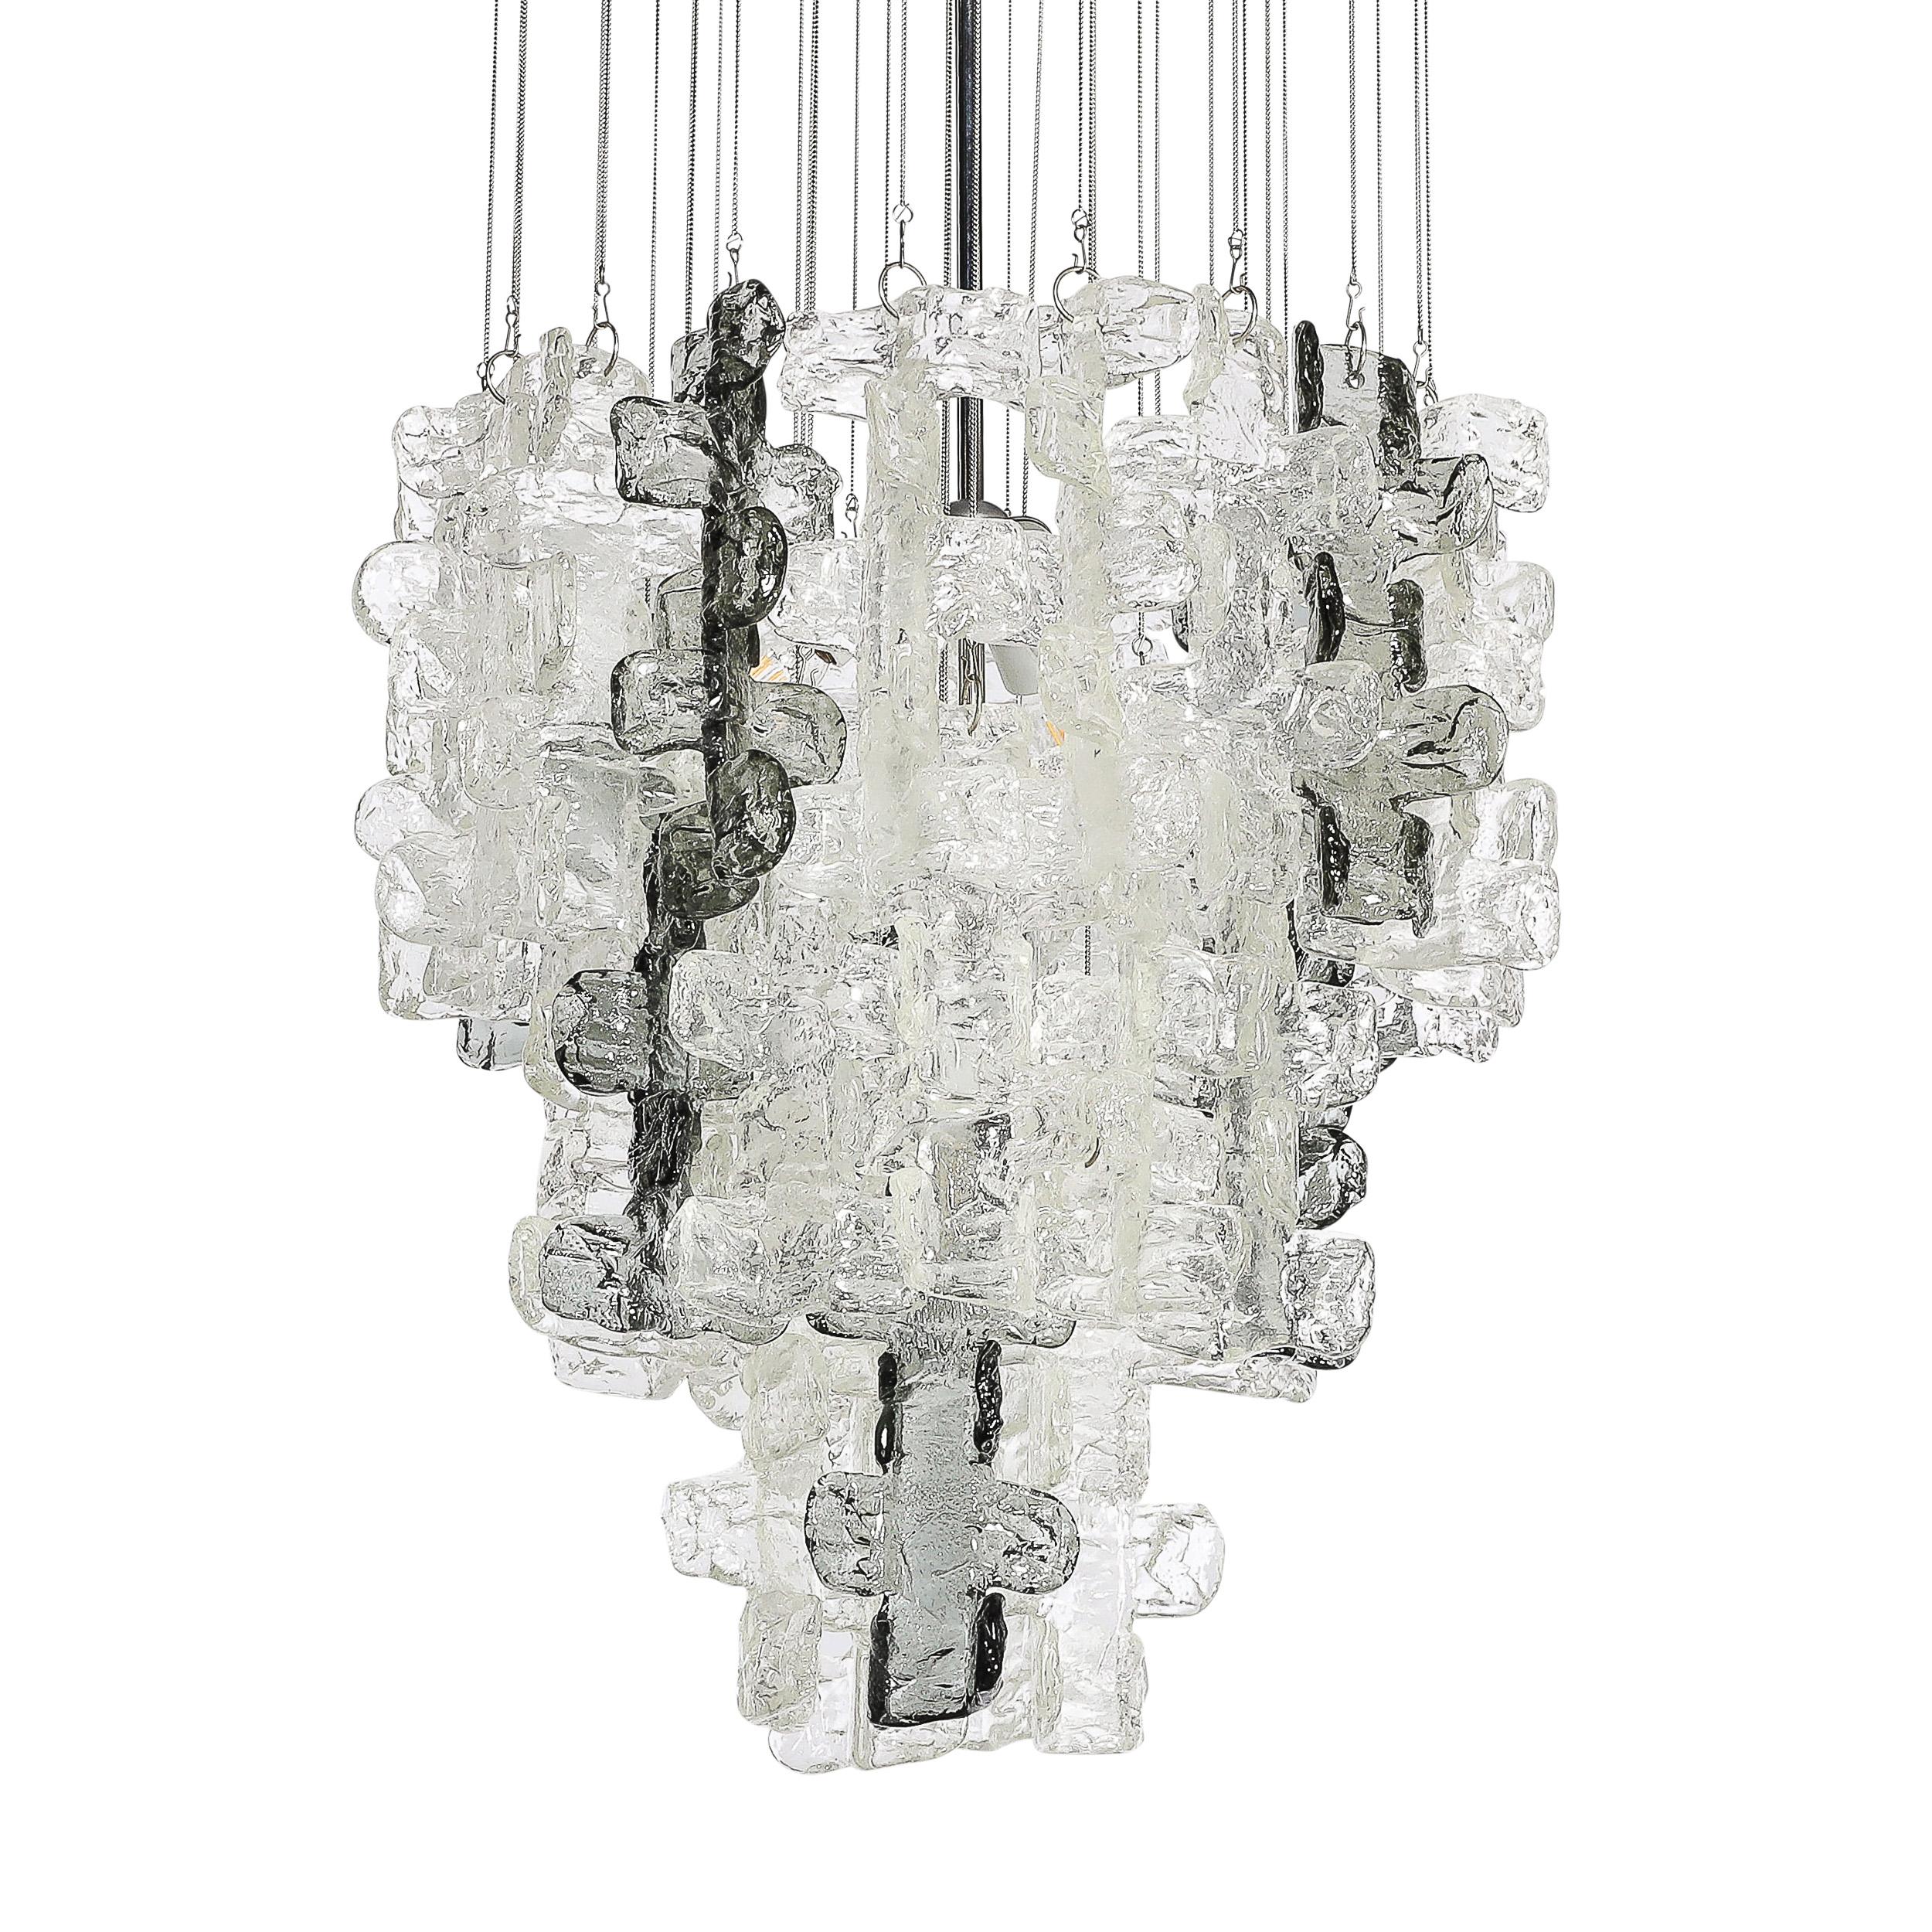 This captivating Mid-Century Modernist Textural Clear and Smoked Glass Chandelier with Chrome Fittings is by the esteemed glass artist Mazzega and originates from Italy, Circa 1970. Features a nested composition of hanging hand-blown glass elements